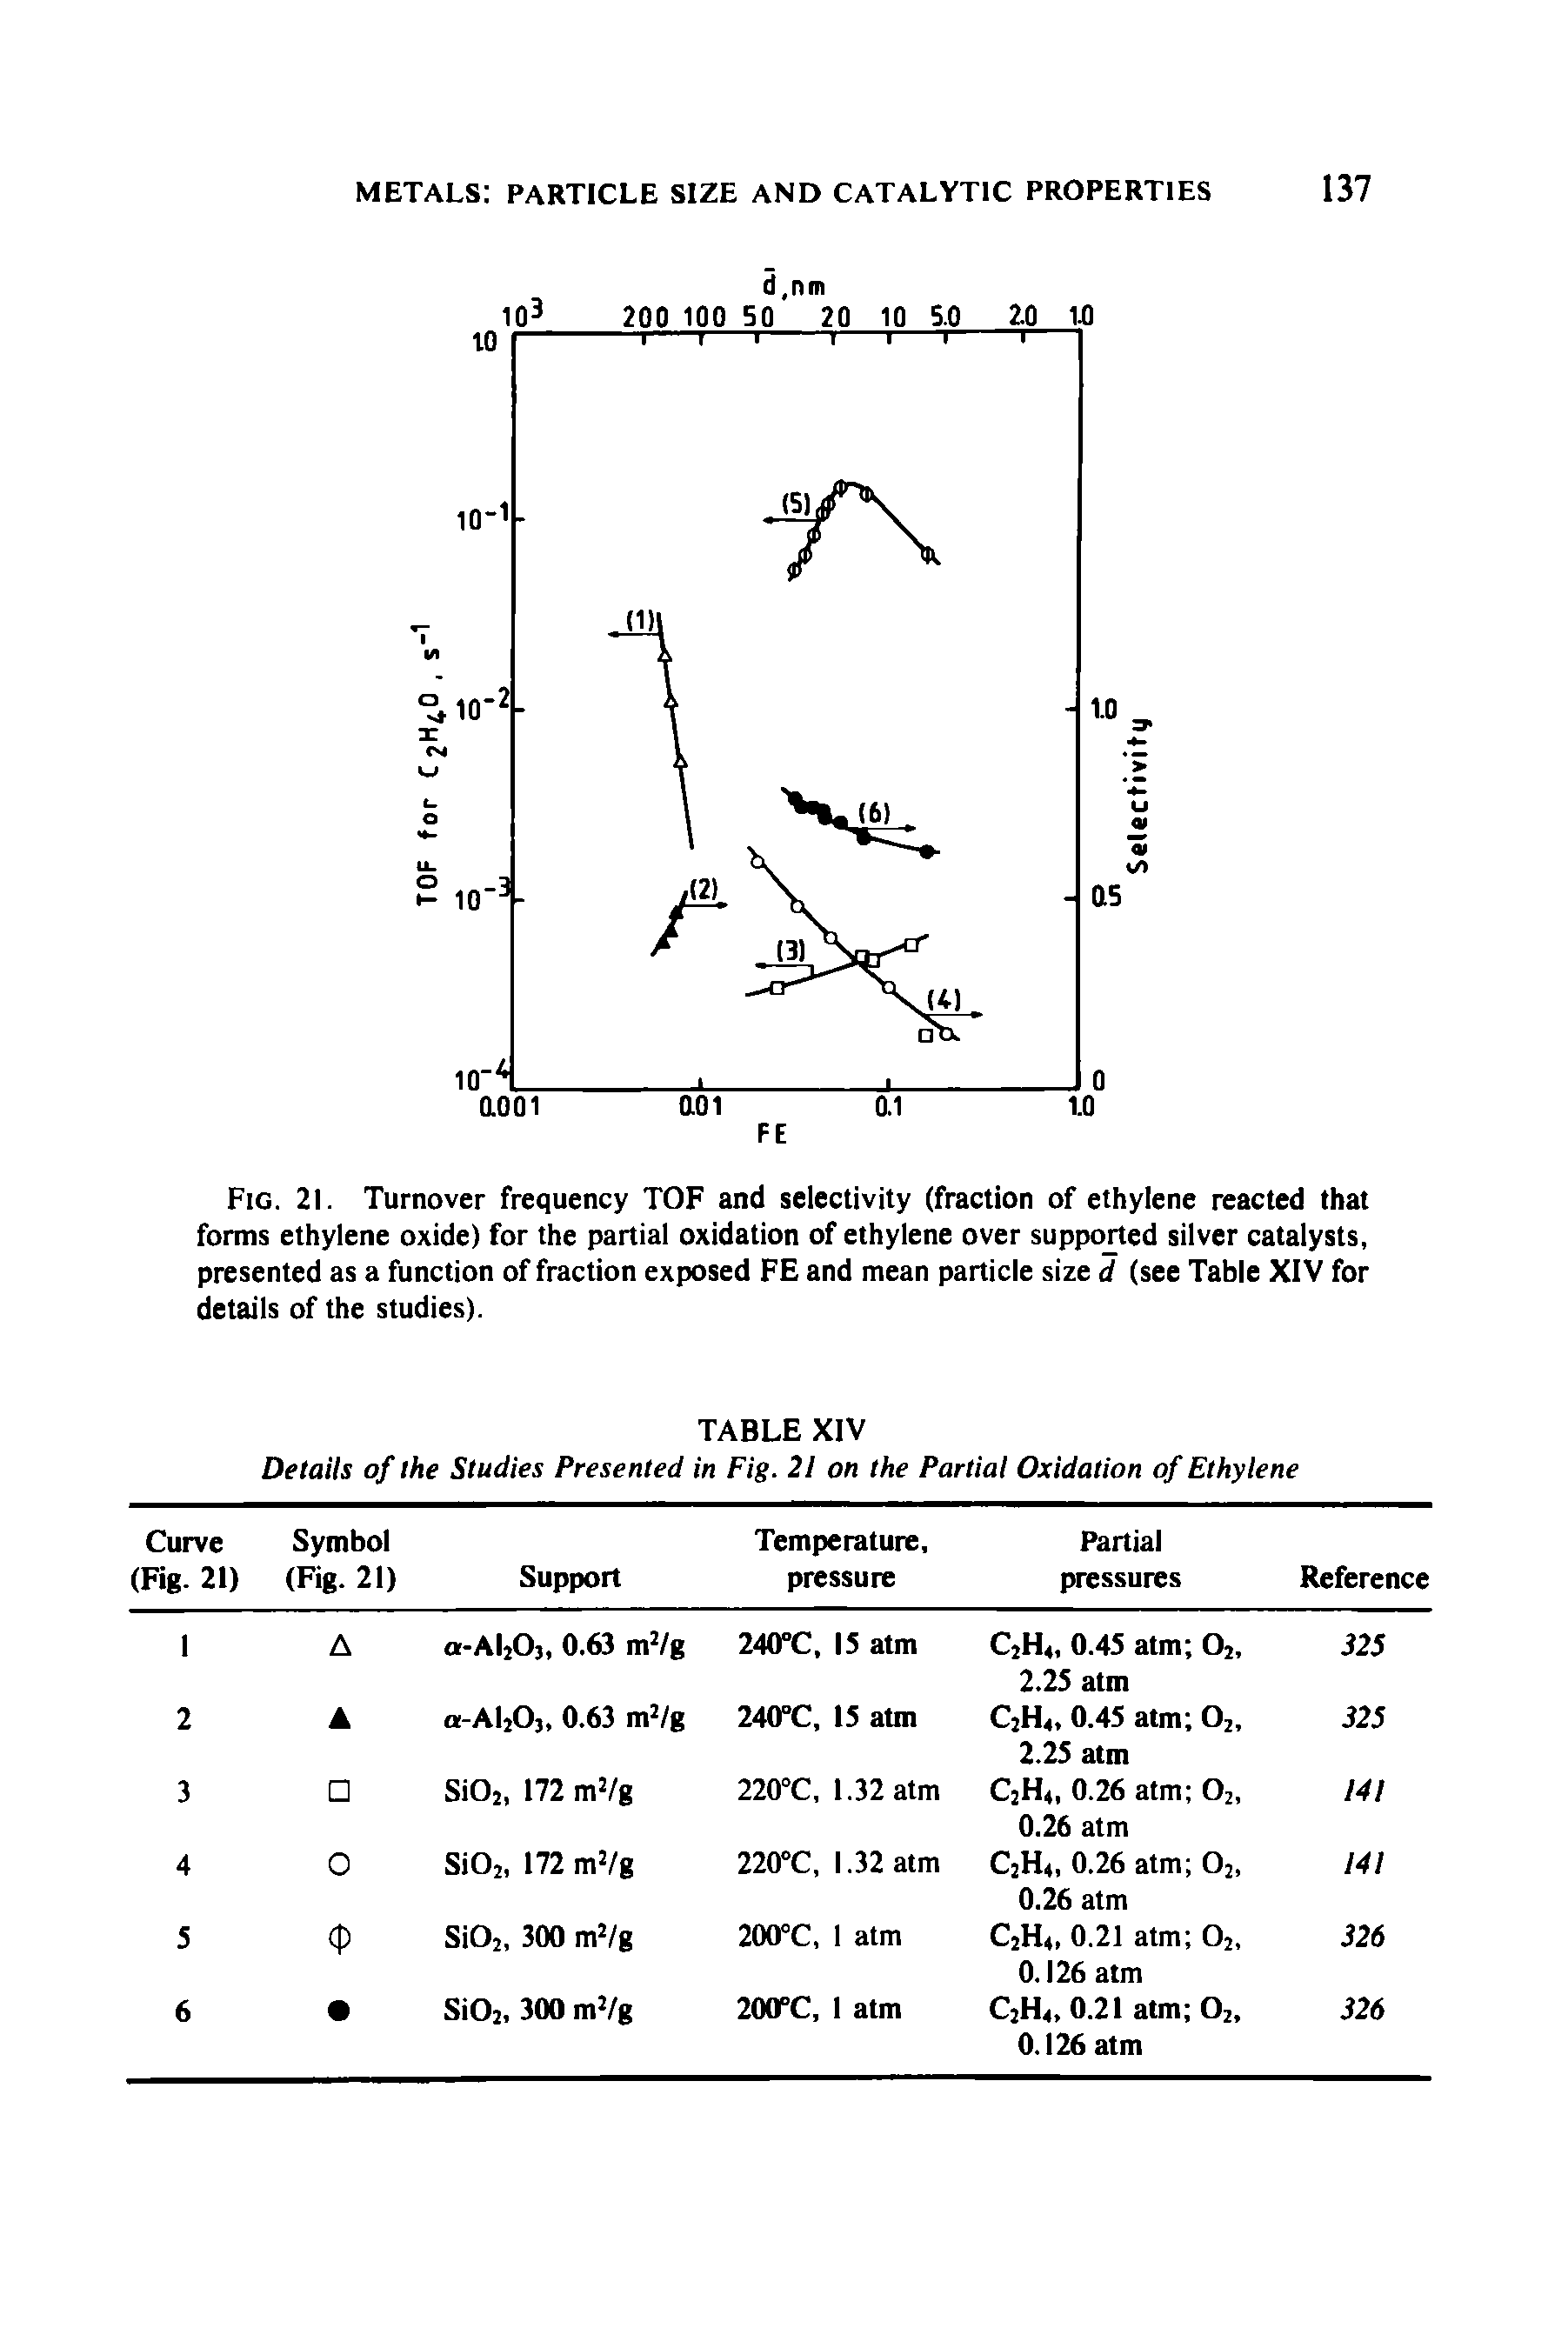 Fig. 21. Turnover frequency TOF and selectivity (fraction of ethylene reacted that forms ethylene oxide) for the partial oxidation of ethylene over supported silver catalysts, presented as a function of fraction exposed FE and mean particle size d (see Table XIV for details of the studies).